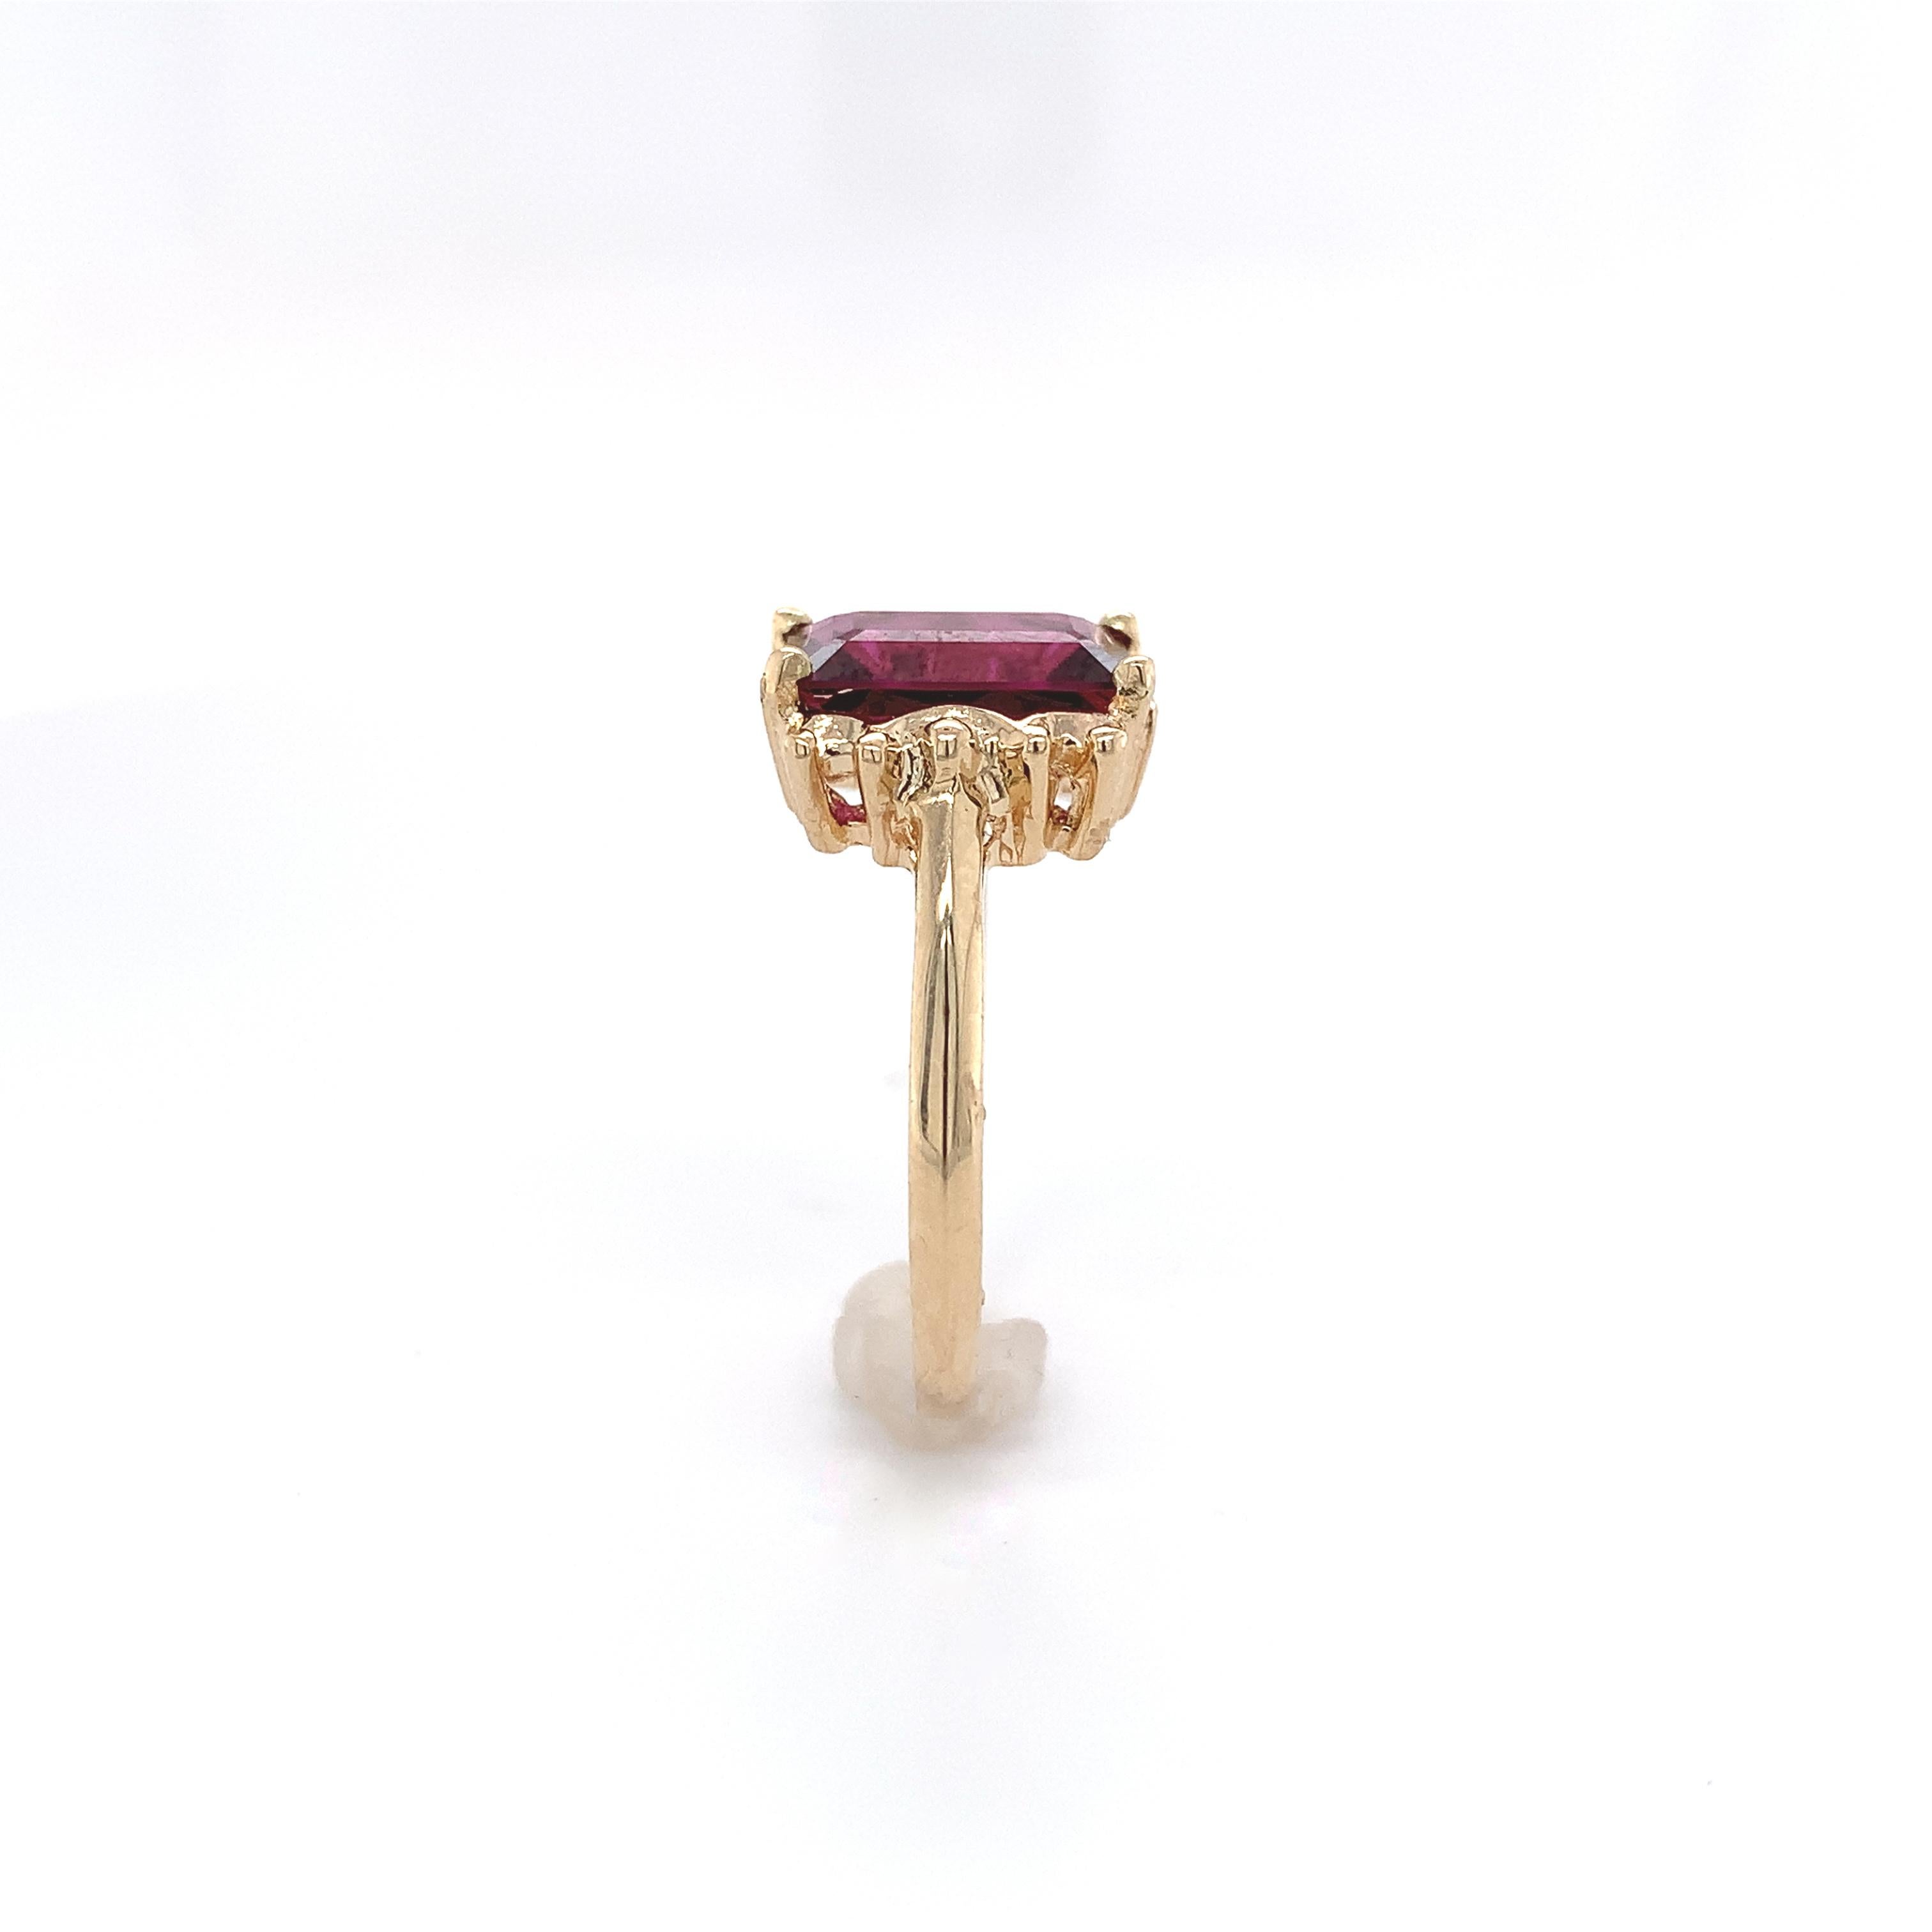 For Sale:  14K Yellow Gold Ring with Emerald Cut 3.51 carat Rhodolite Garnet 3